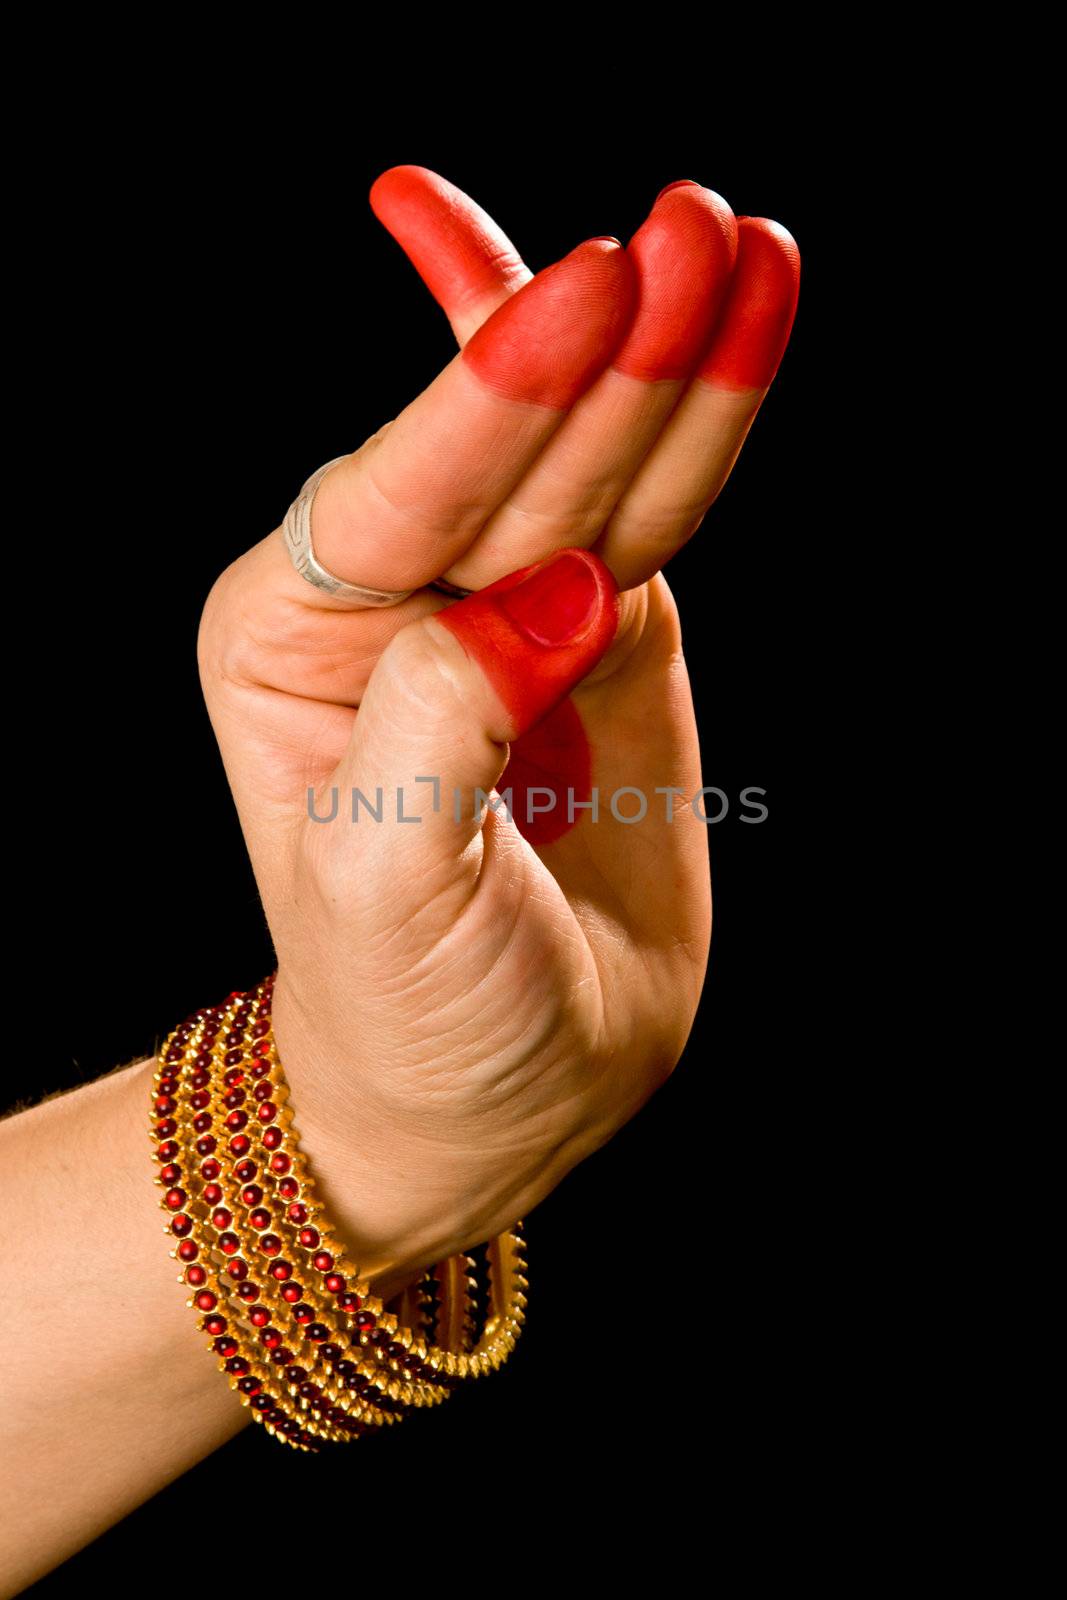 Woman hand showing Chatura hasta  (hand gesture, also called mudra) (meaning "Square") of indian classic dance Bharata Natyam. Also used in other indian classical dances Kuchipudi and Odissi.